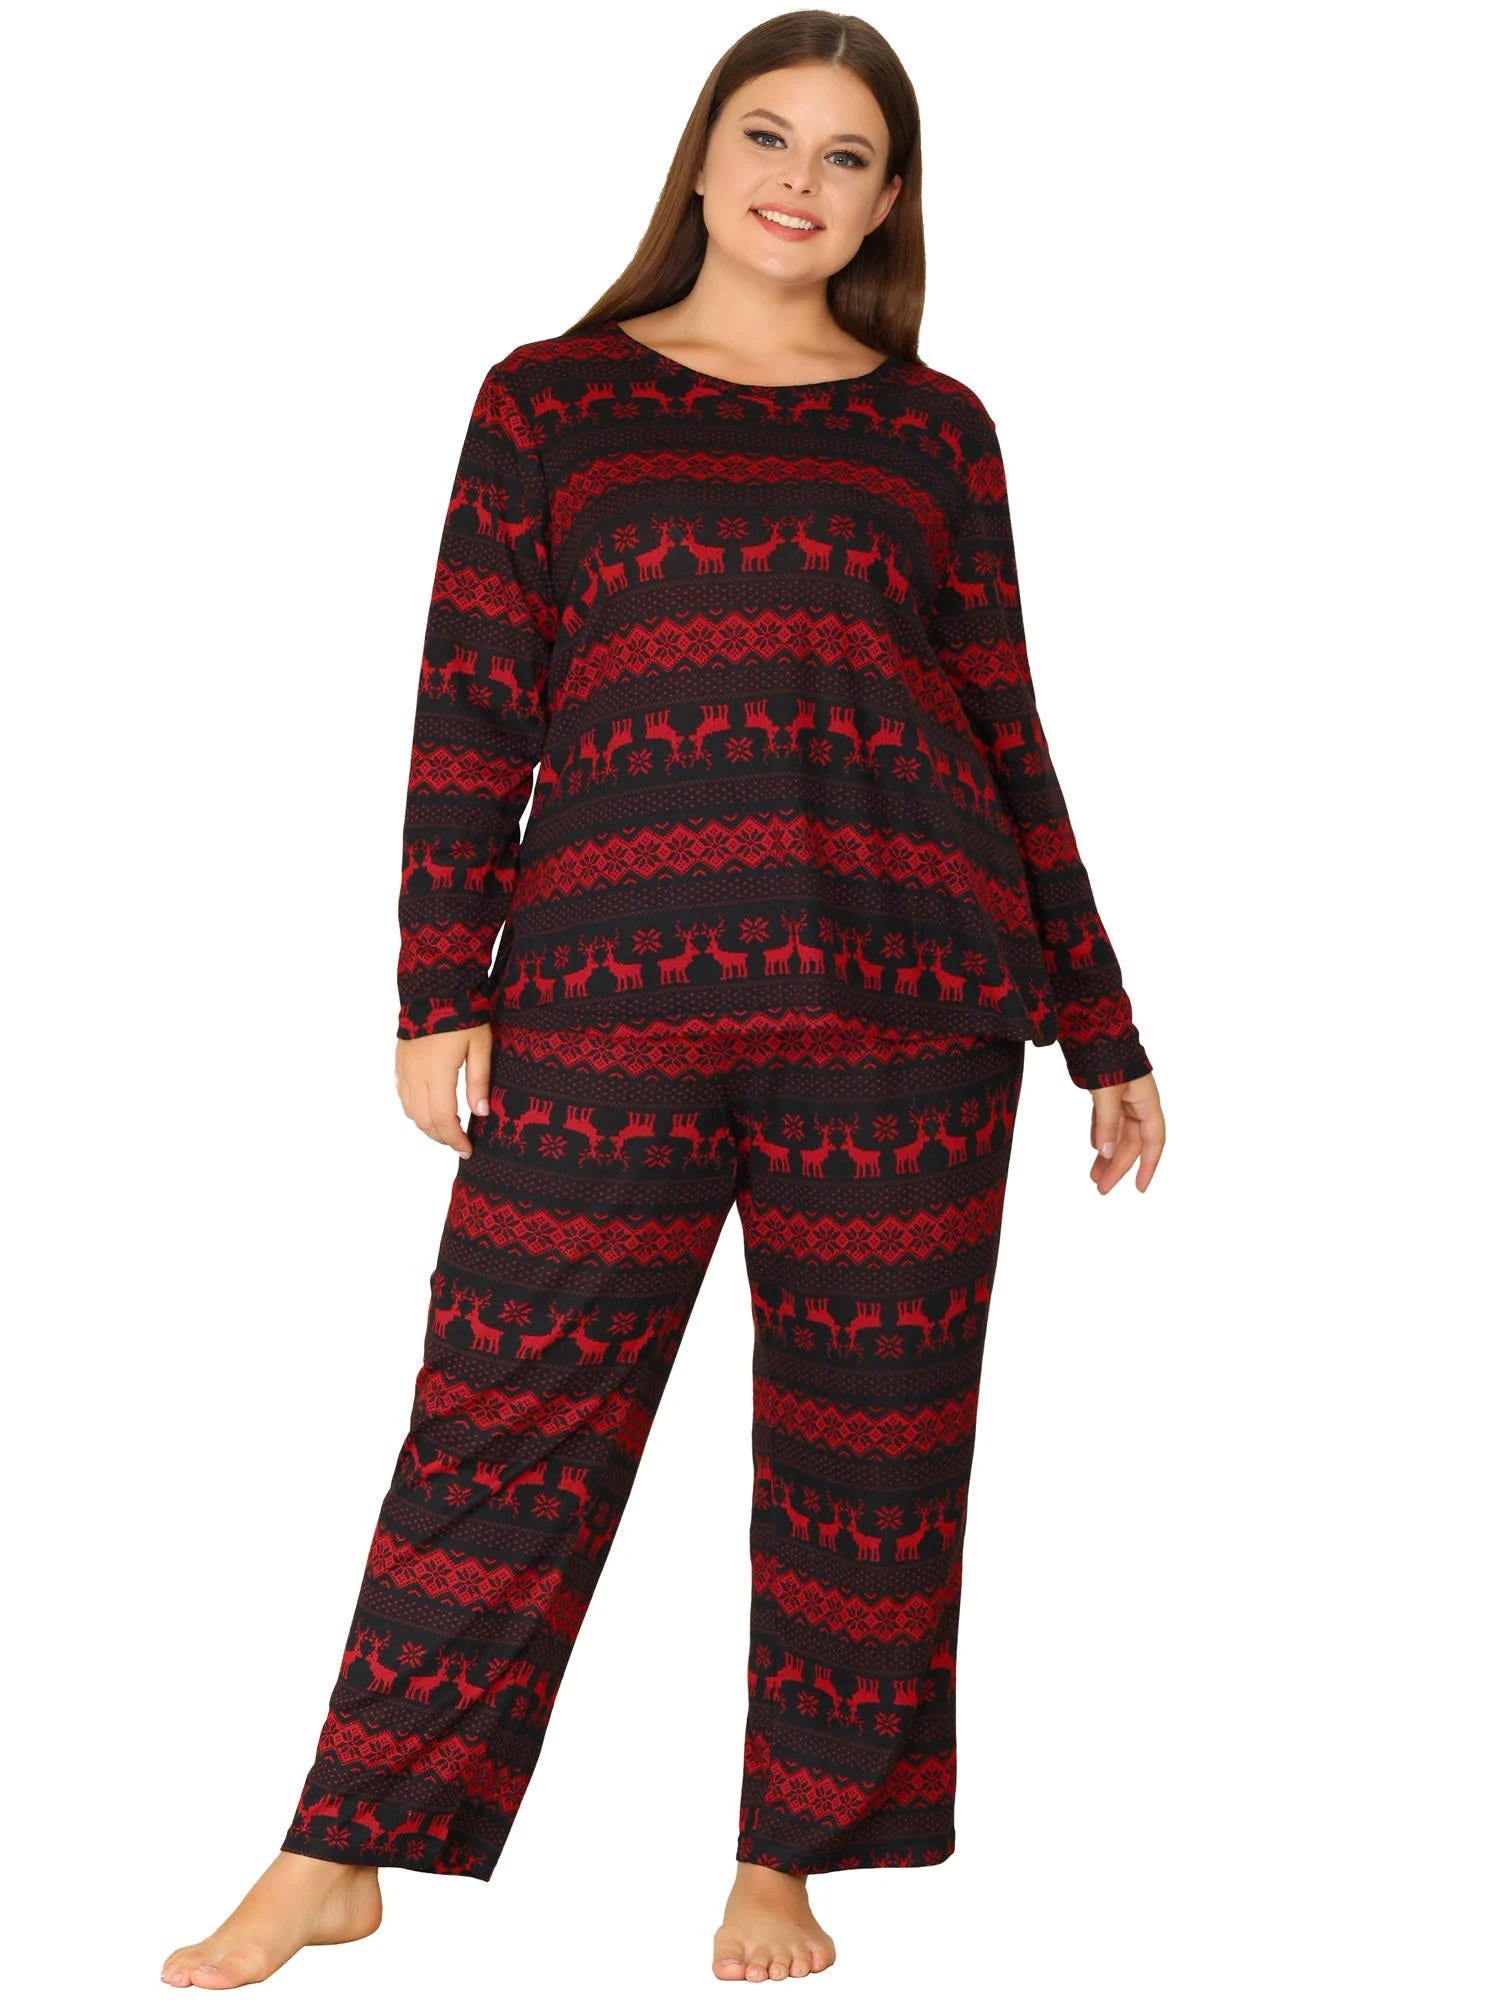 Soft Long Sleeve Pajama Set for Women Plus Size in Christmas Pattern | Image